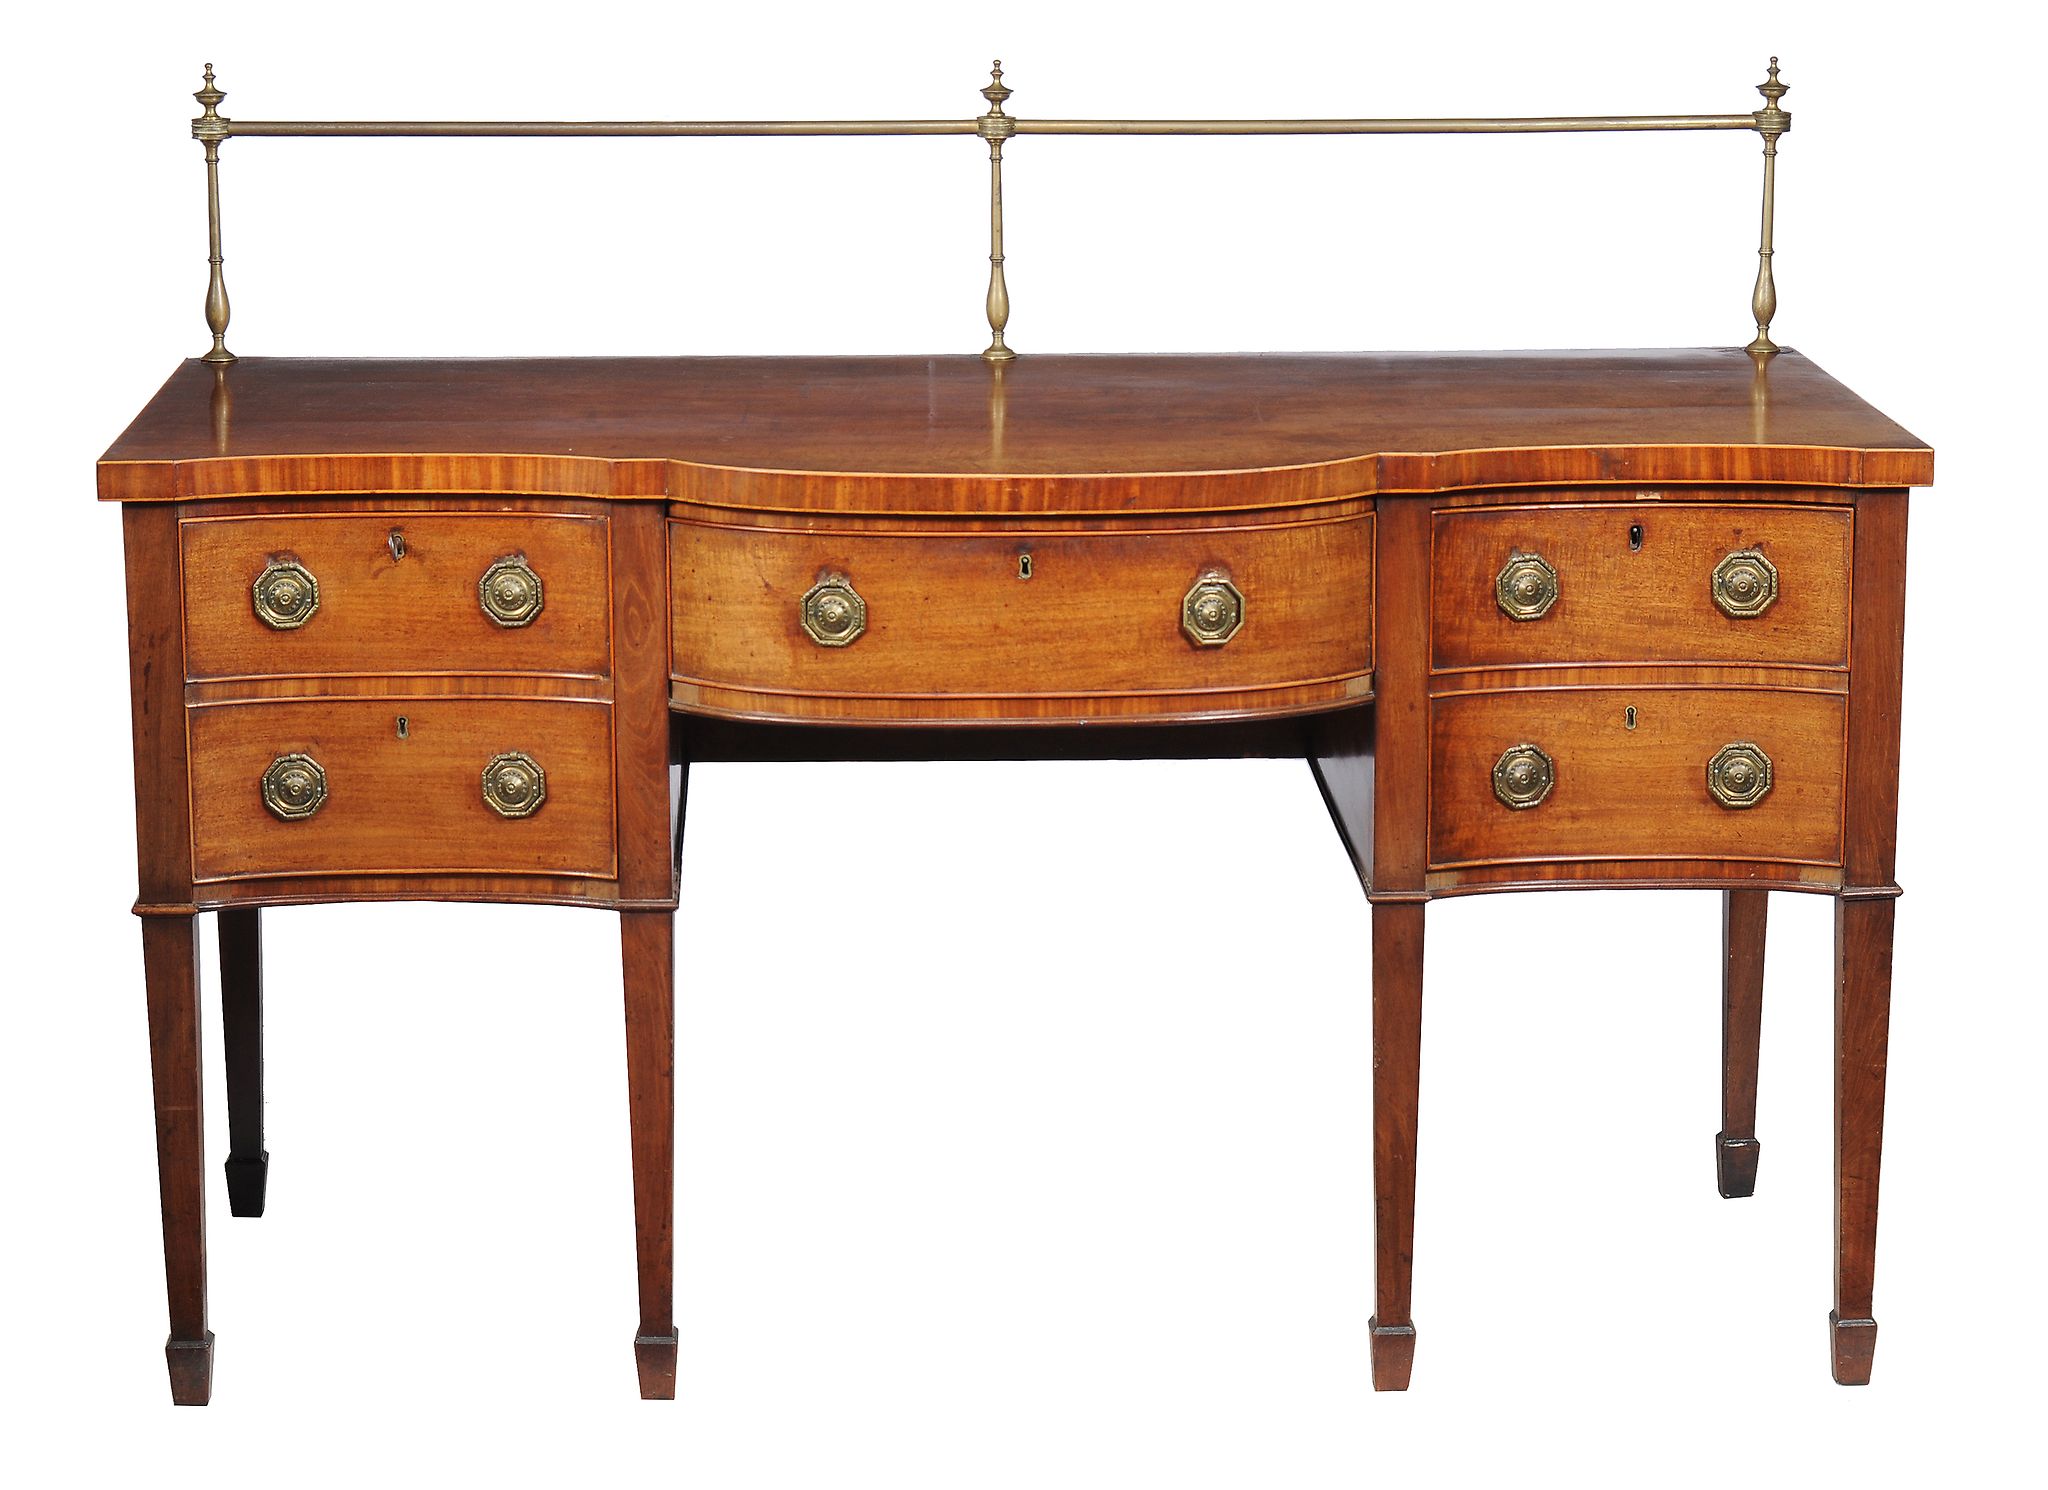 A George III mahogany sideboard, circa 1790, of serpentine outline, with an associated rail, 91cm